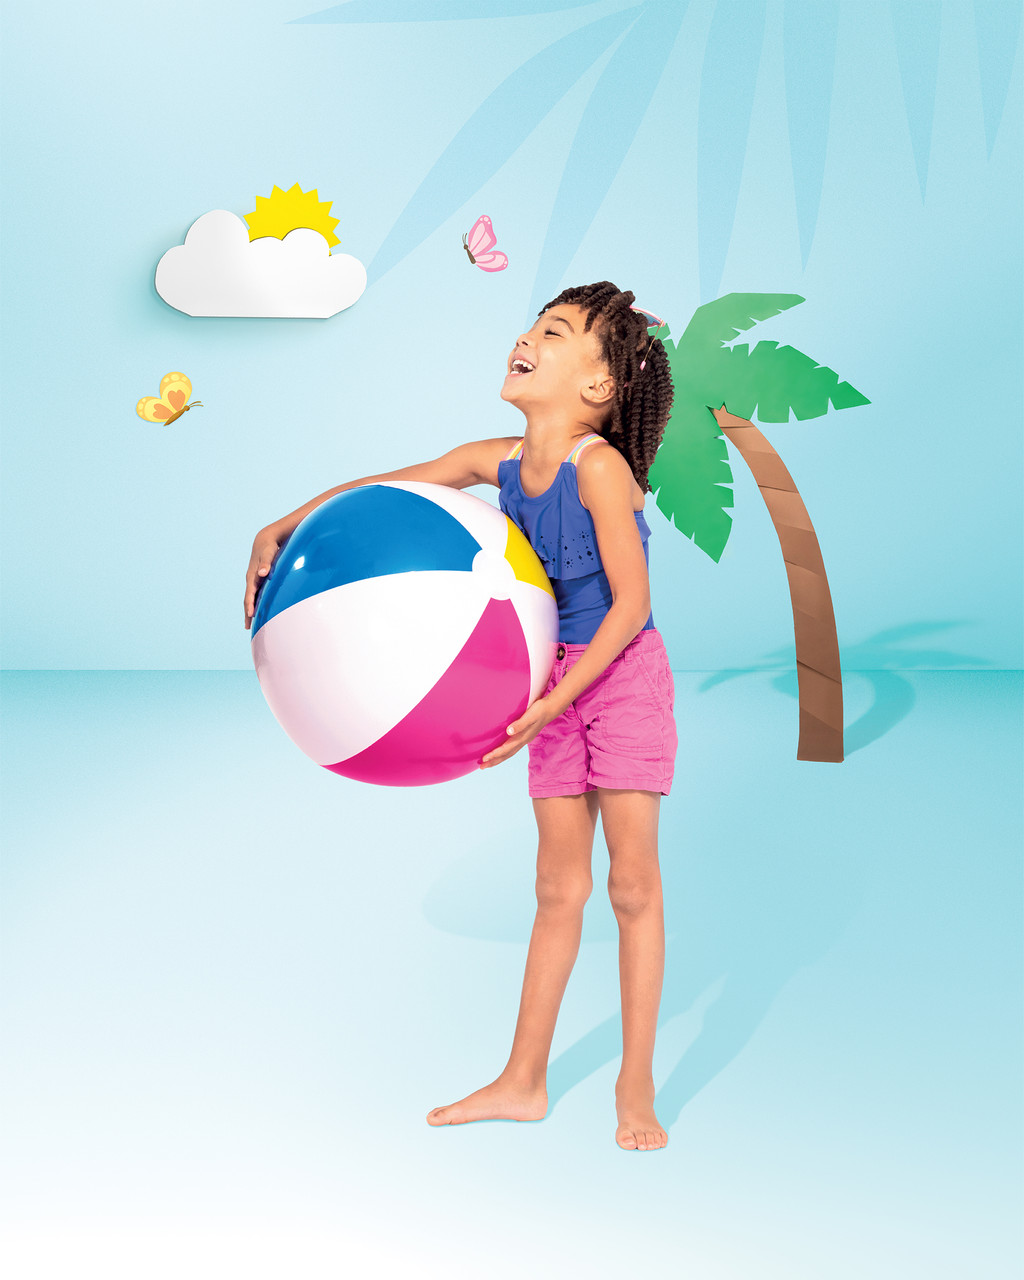 INTEX 24in Glossy Panel Inflatable Beach Ball